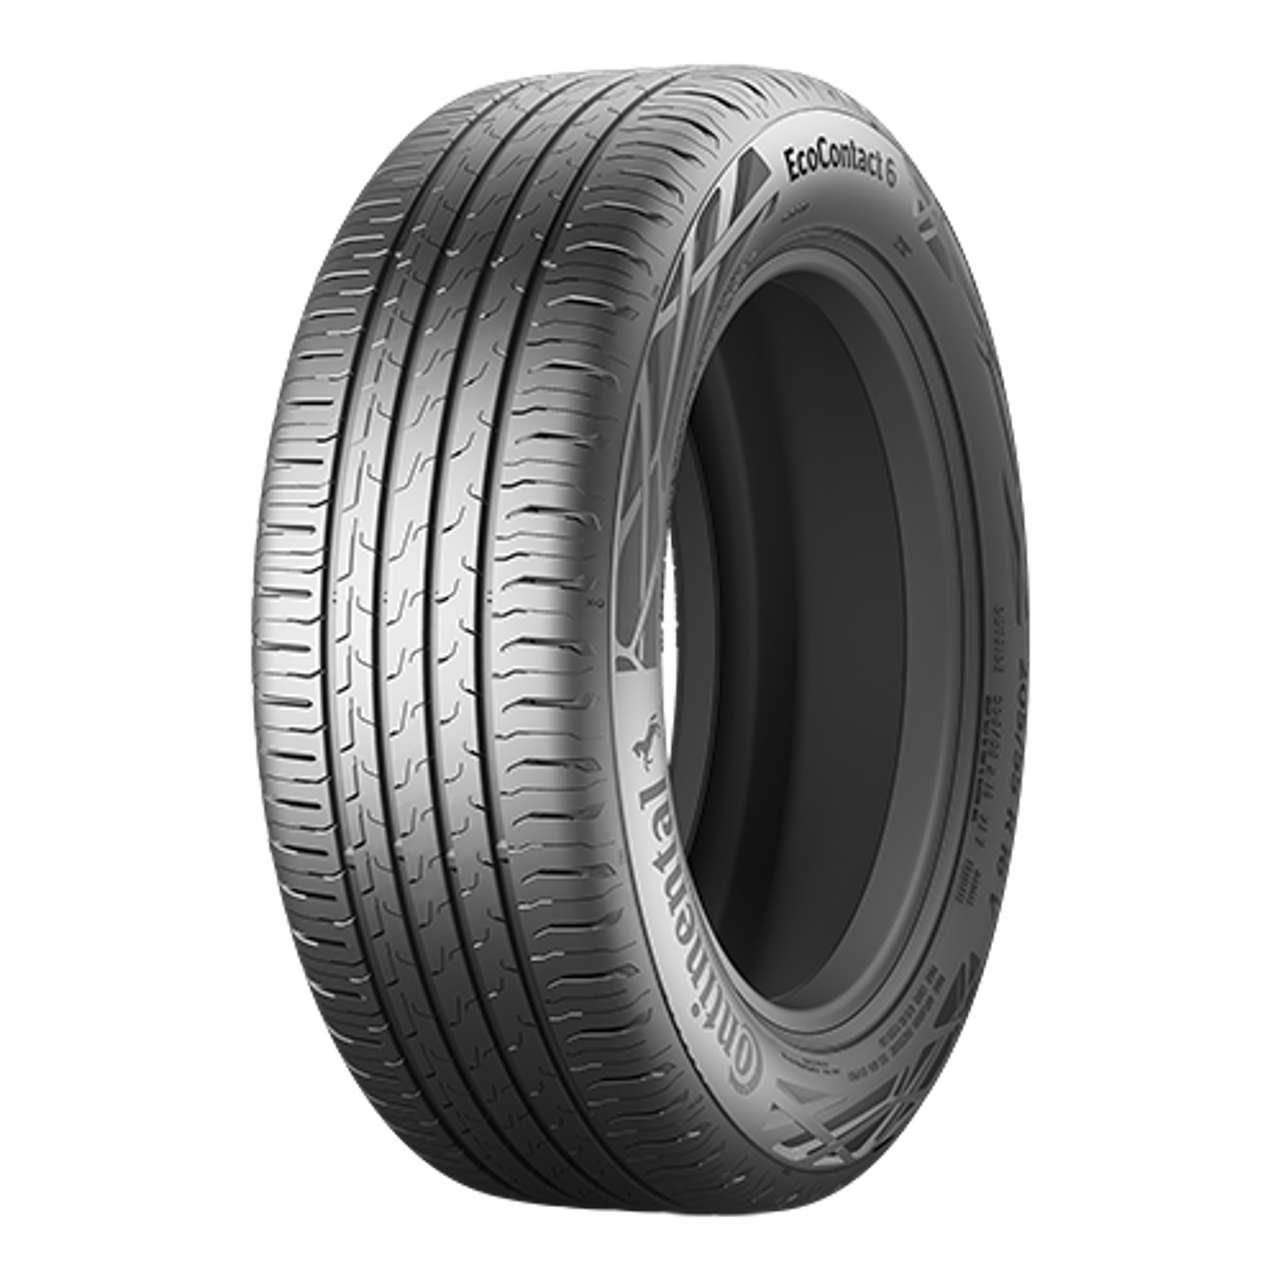 CONTINENTAL ECOCONTACT 6 (EVc) 185/55R15 86V von Continental